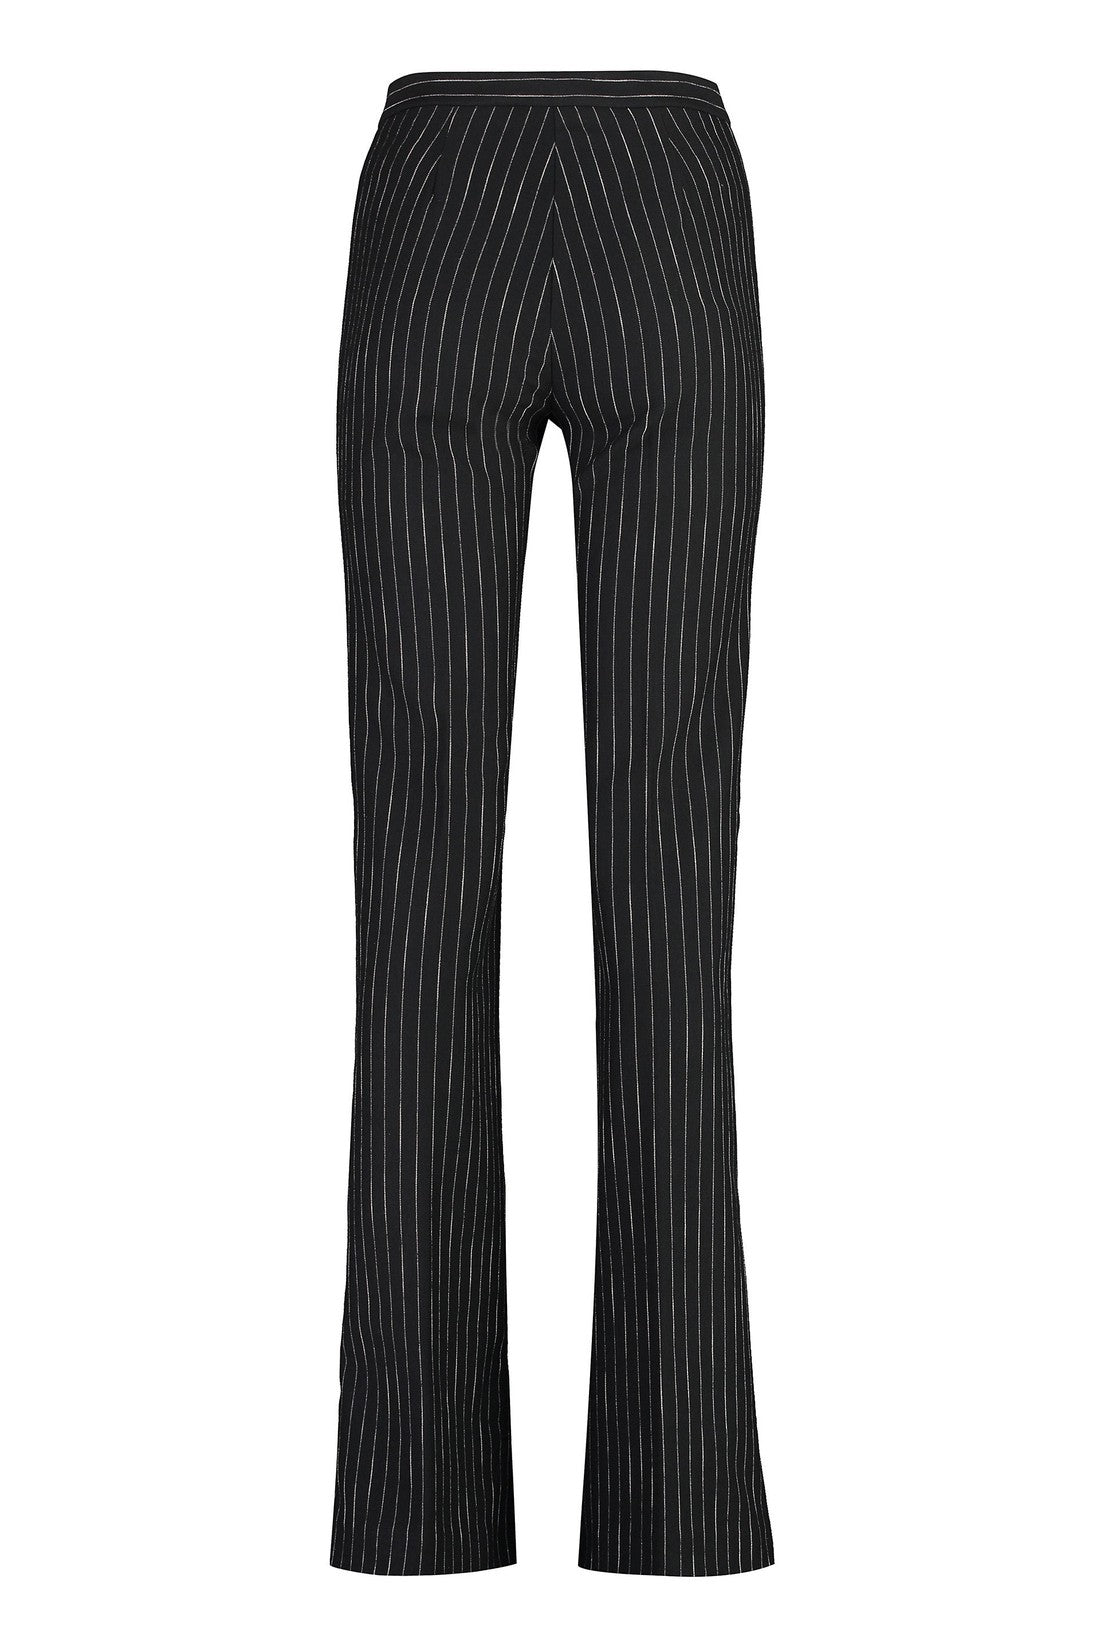 Pinko-OUTLET-SALE-Flared viscose trousers-ARCHIVIST